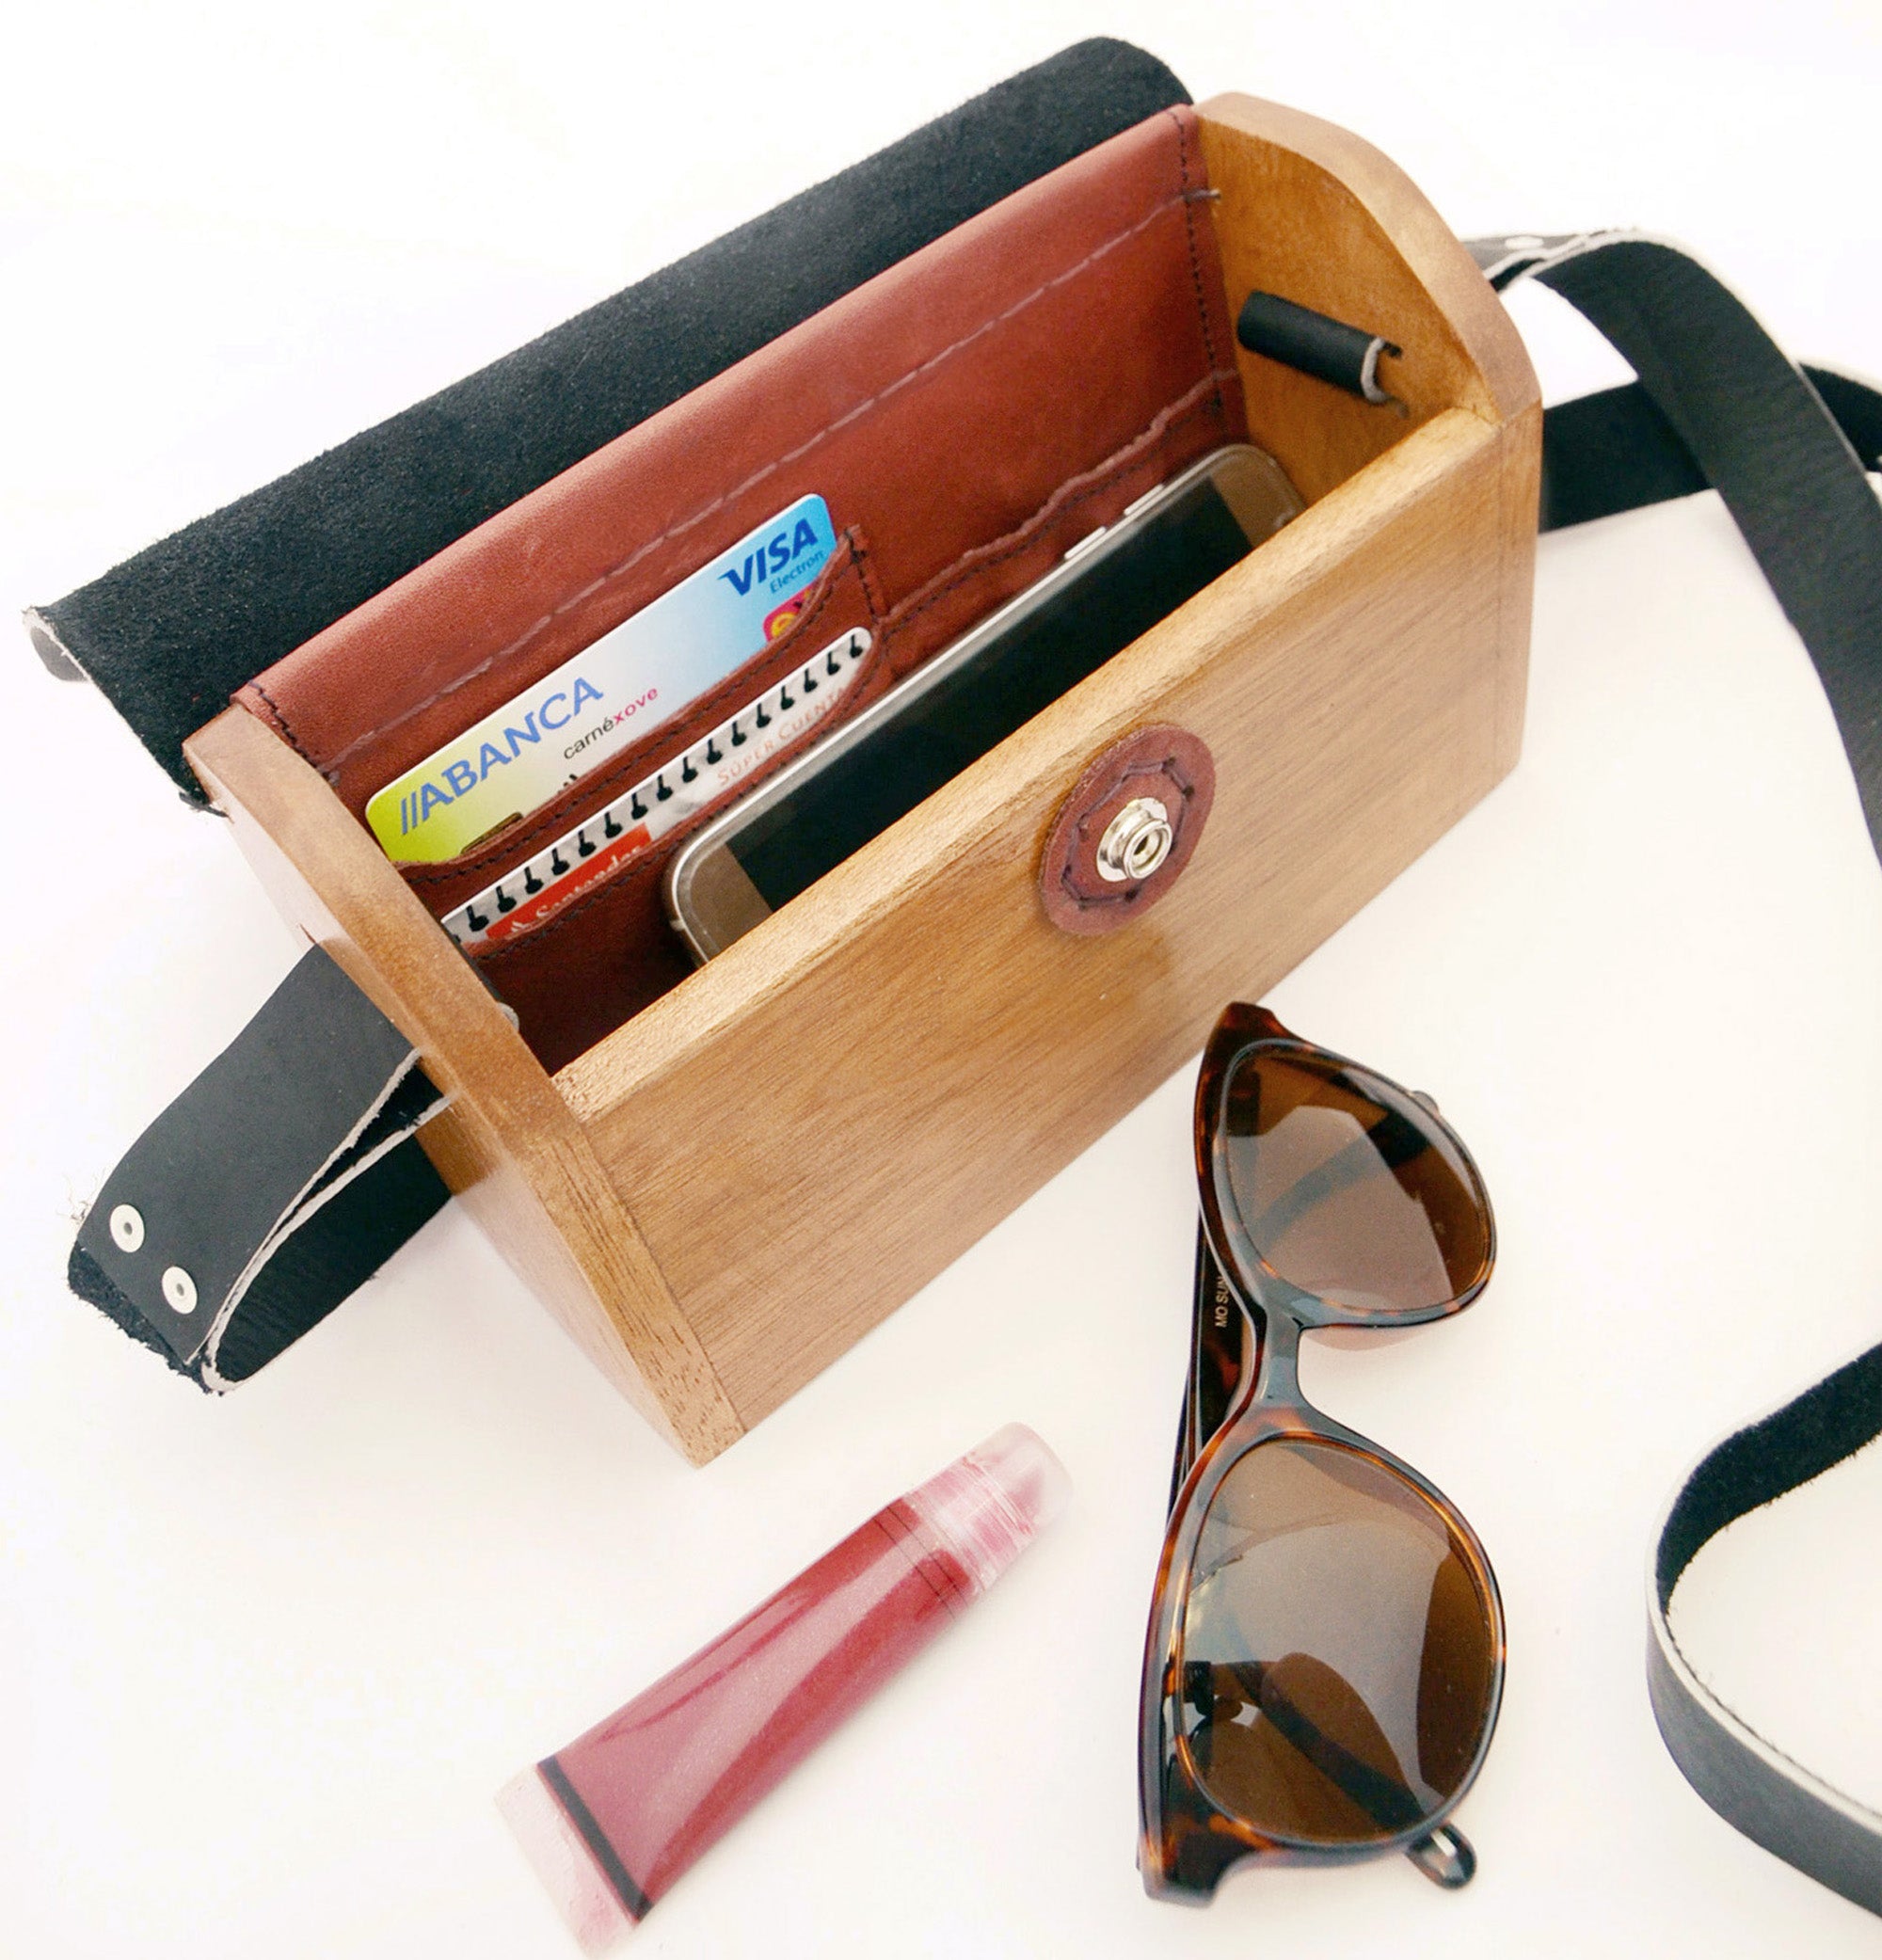 Small crossbody bags or wooden purse, Handmade wooden bag or mexico handbag, Leather and wood bag or wood leather purse